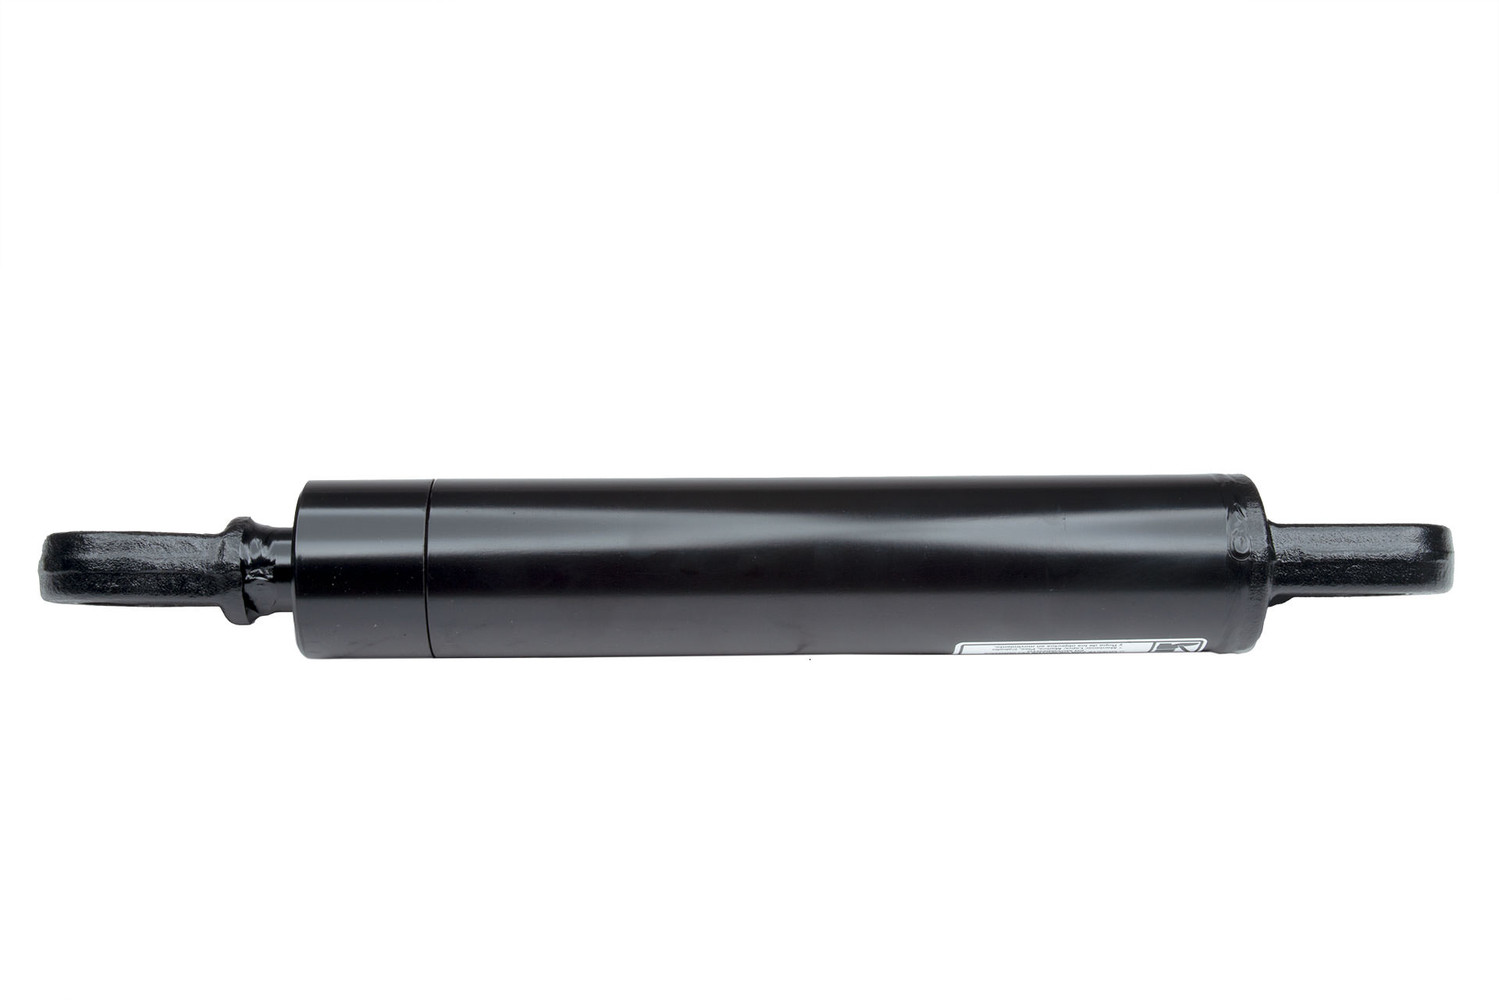 CHIEF WTG WELDED TANG HYDRAULIC CYLINDER: 2.5" BORE X 20" STROKE - 1.375" ROD